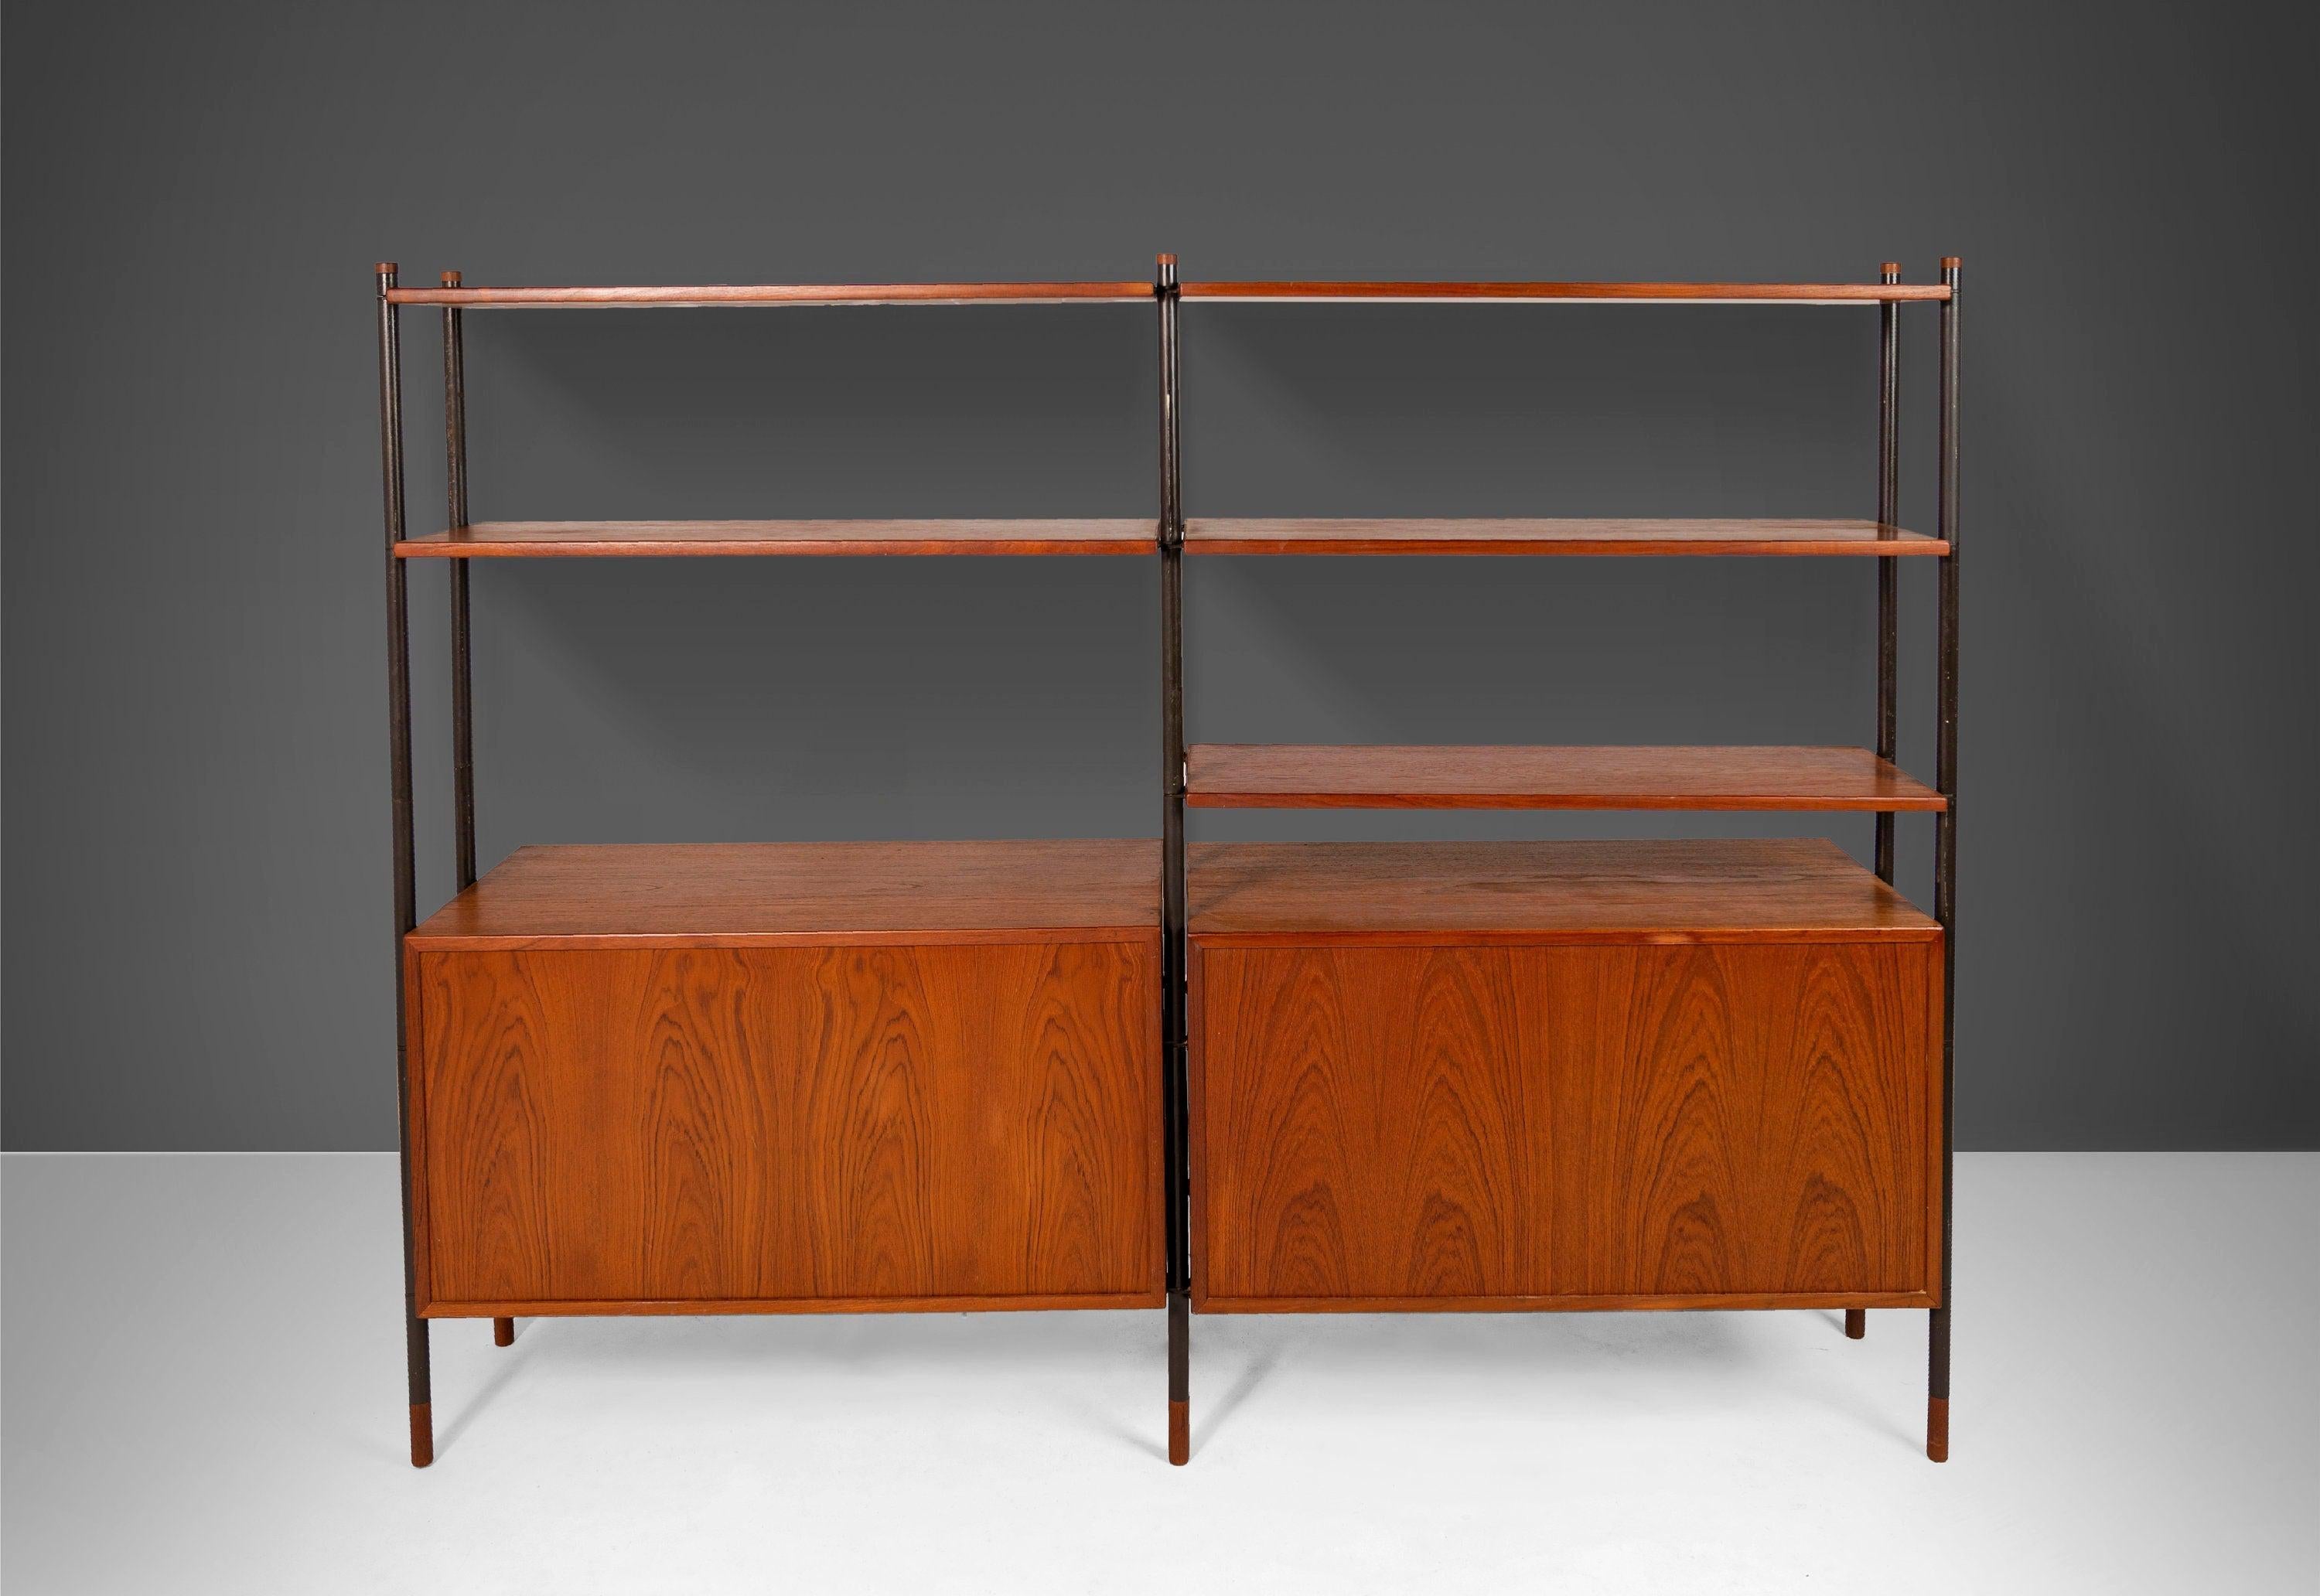 Mid-20th Century Danish Modern Modular 2 Bay Wall Unit by Lyby Mobler, C. 1960s For Sale